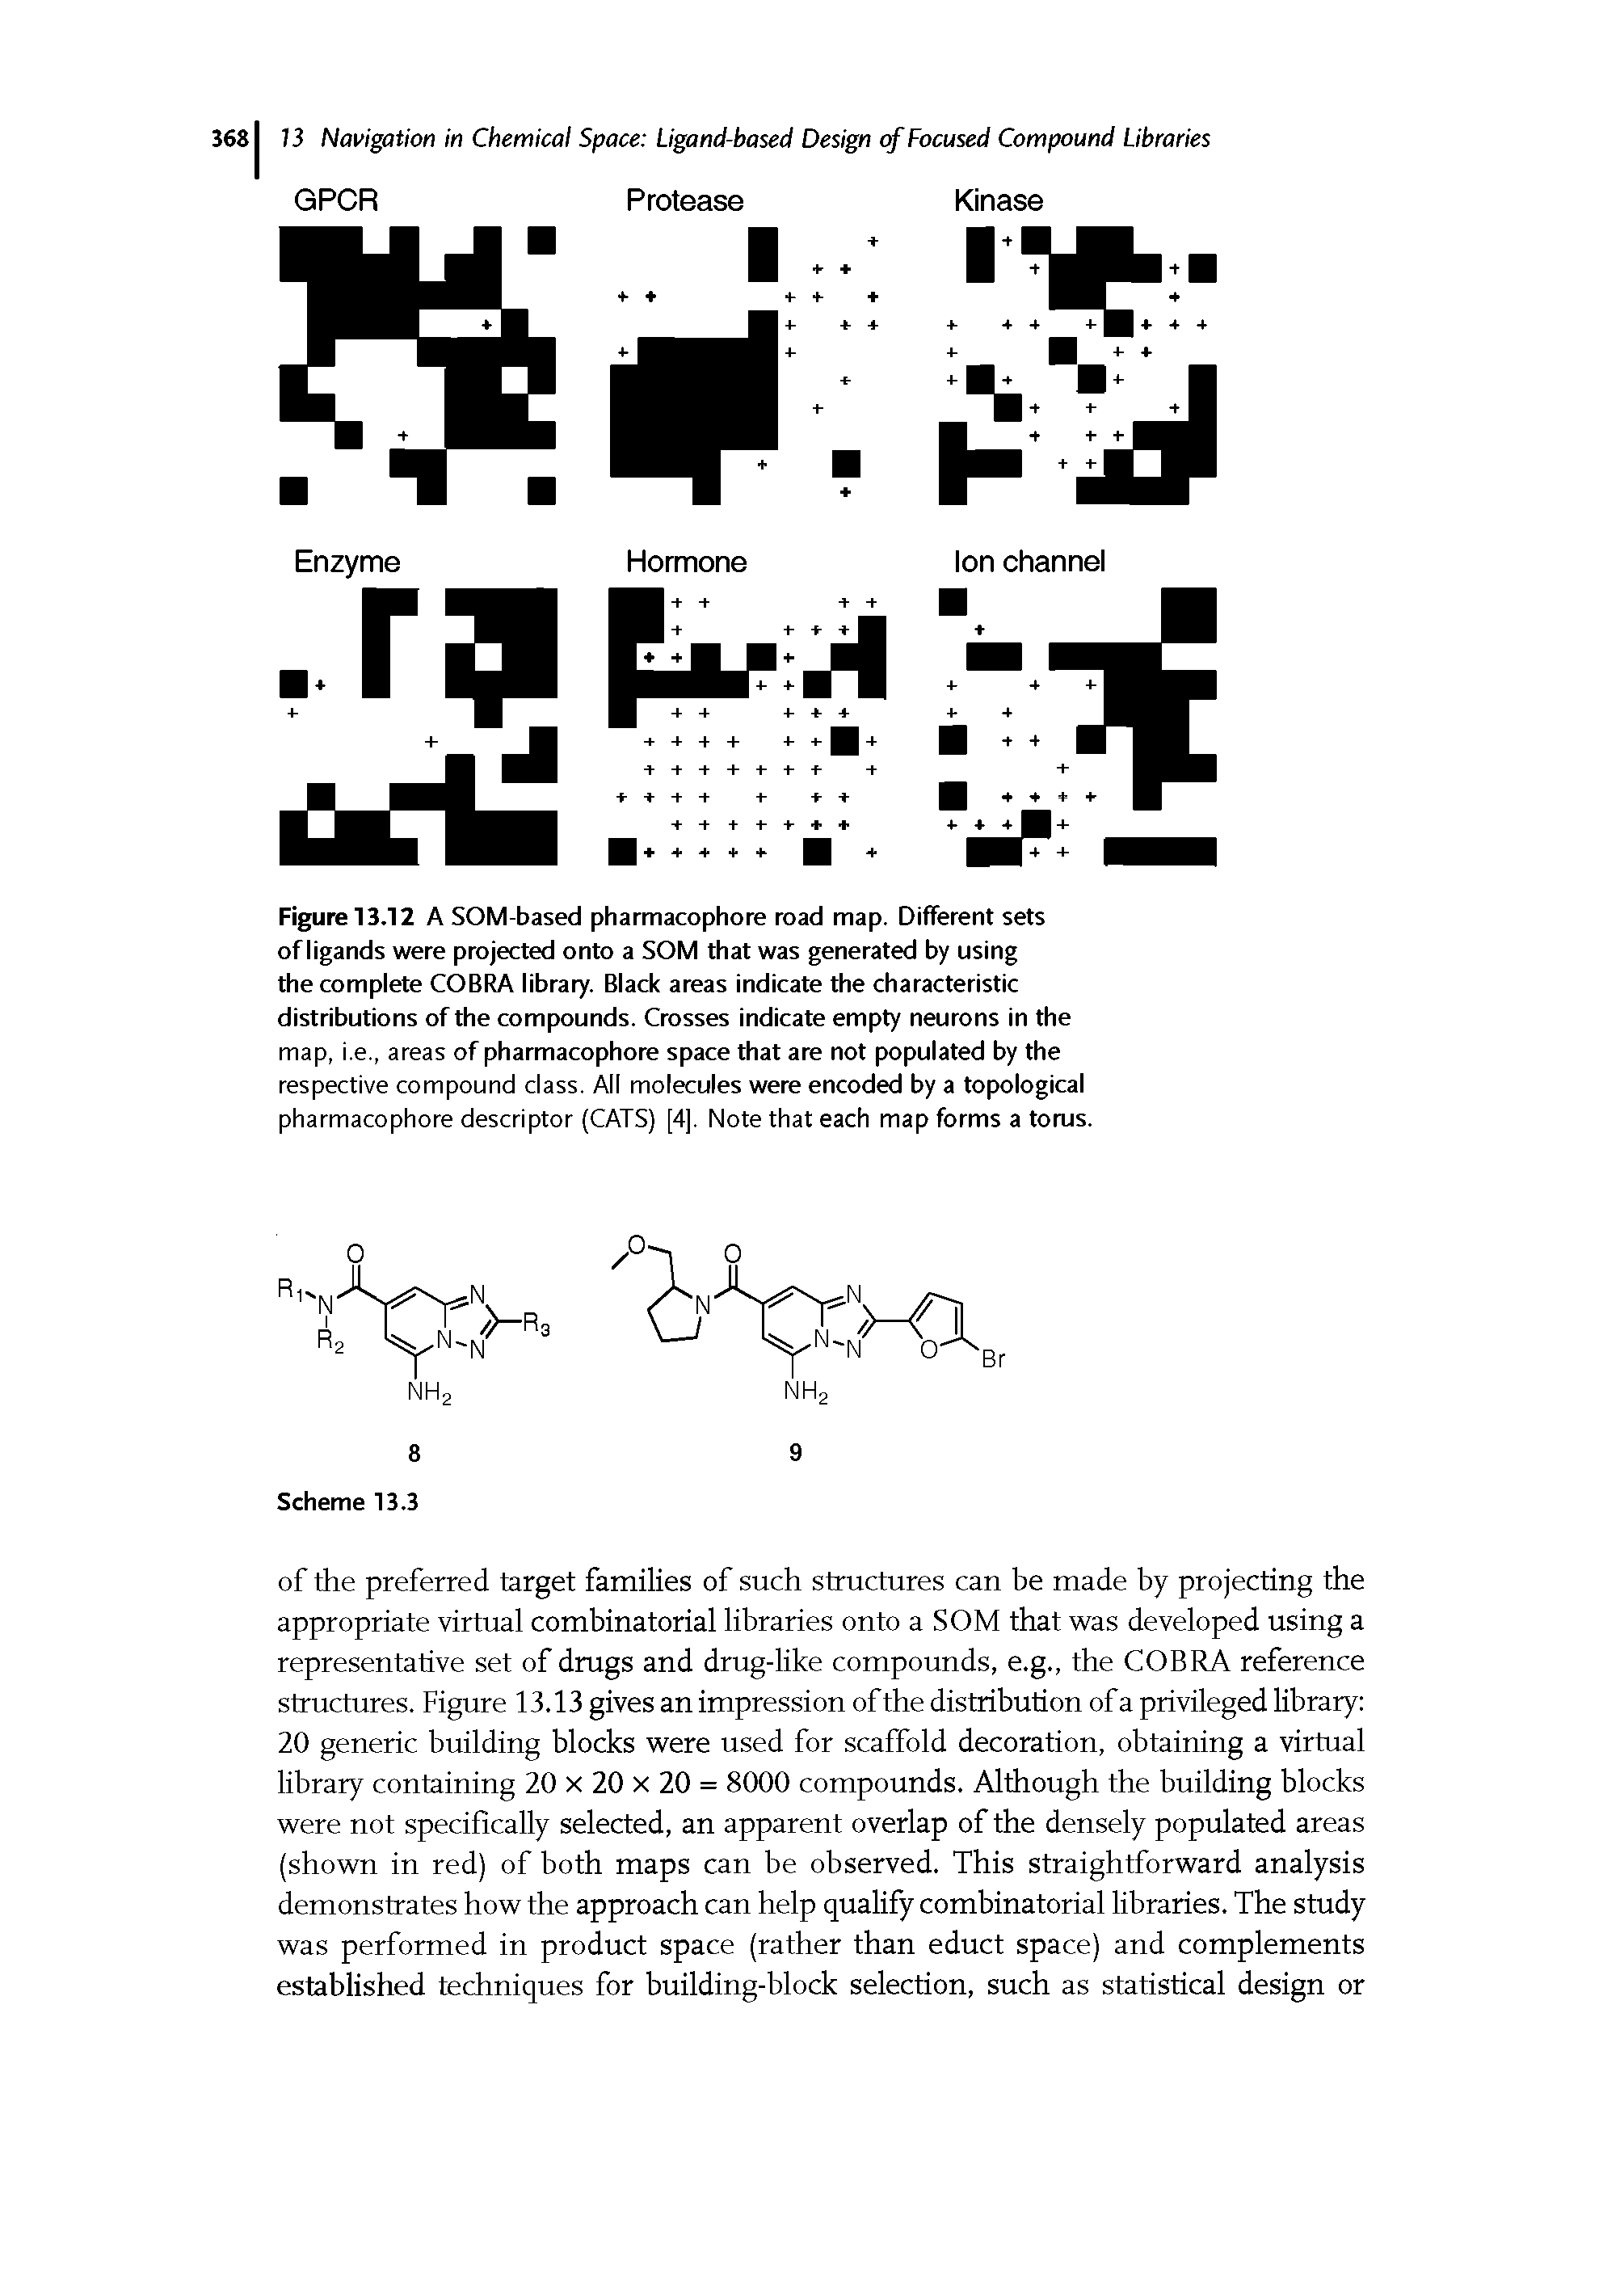 Figure 13.12 A SOM-based pharmacophore road map. Different sets of ligands were projected onto a SOM that was generated by using the complete COBRA library. Black areas indicate the characteristic distributions of the compounds. Crosses indicate empty neurons in the map, i.e., areas of pharmacophore space that are not populated by the respective compound class. All molecules were encoded by a topological pharmacophore descriptor (CATS) [4], Note that each map forms a torus.